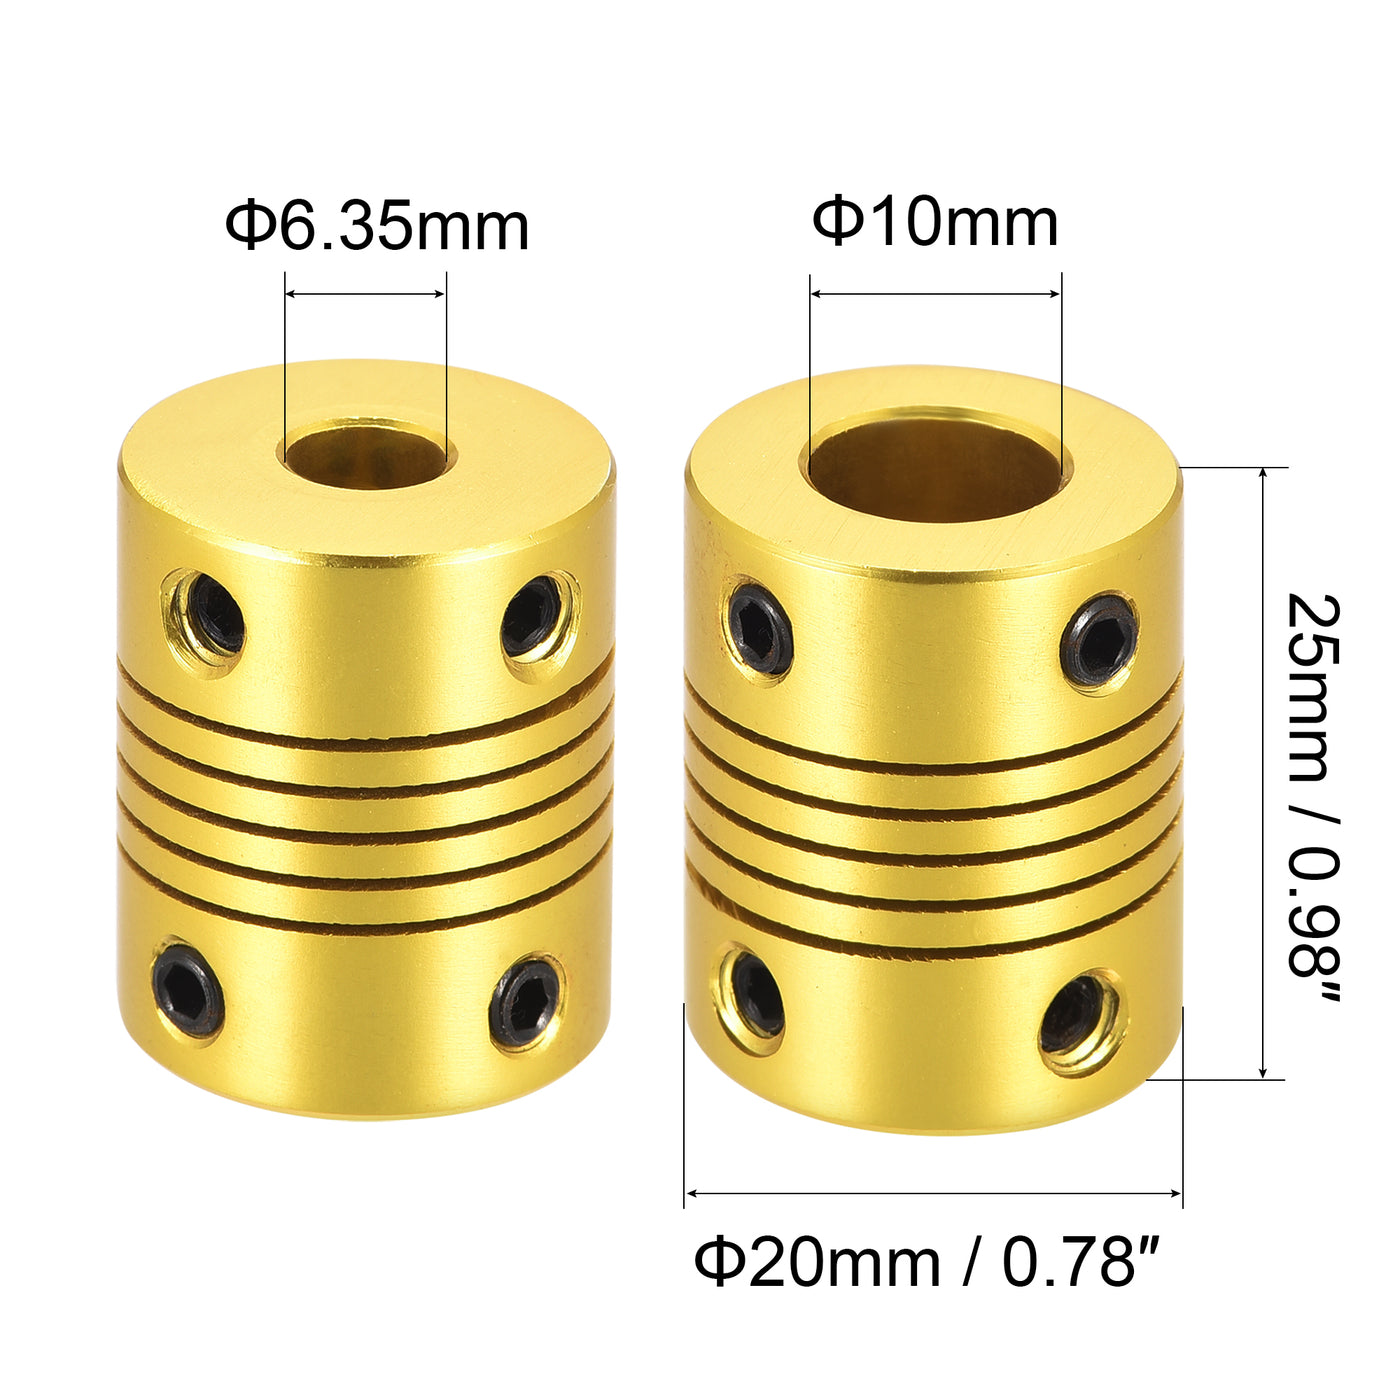 uxcell Uxcell 2 Pcs 10mm to 6.35mm Aluminum Alloy Shaft Coupling Flexible L25xD20 Golden Tone